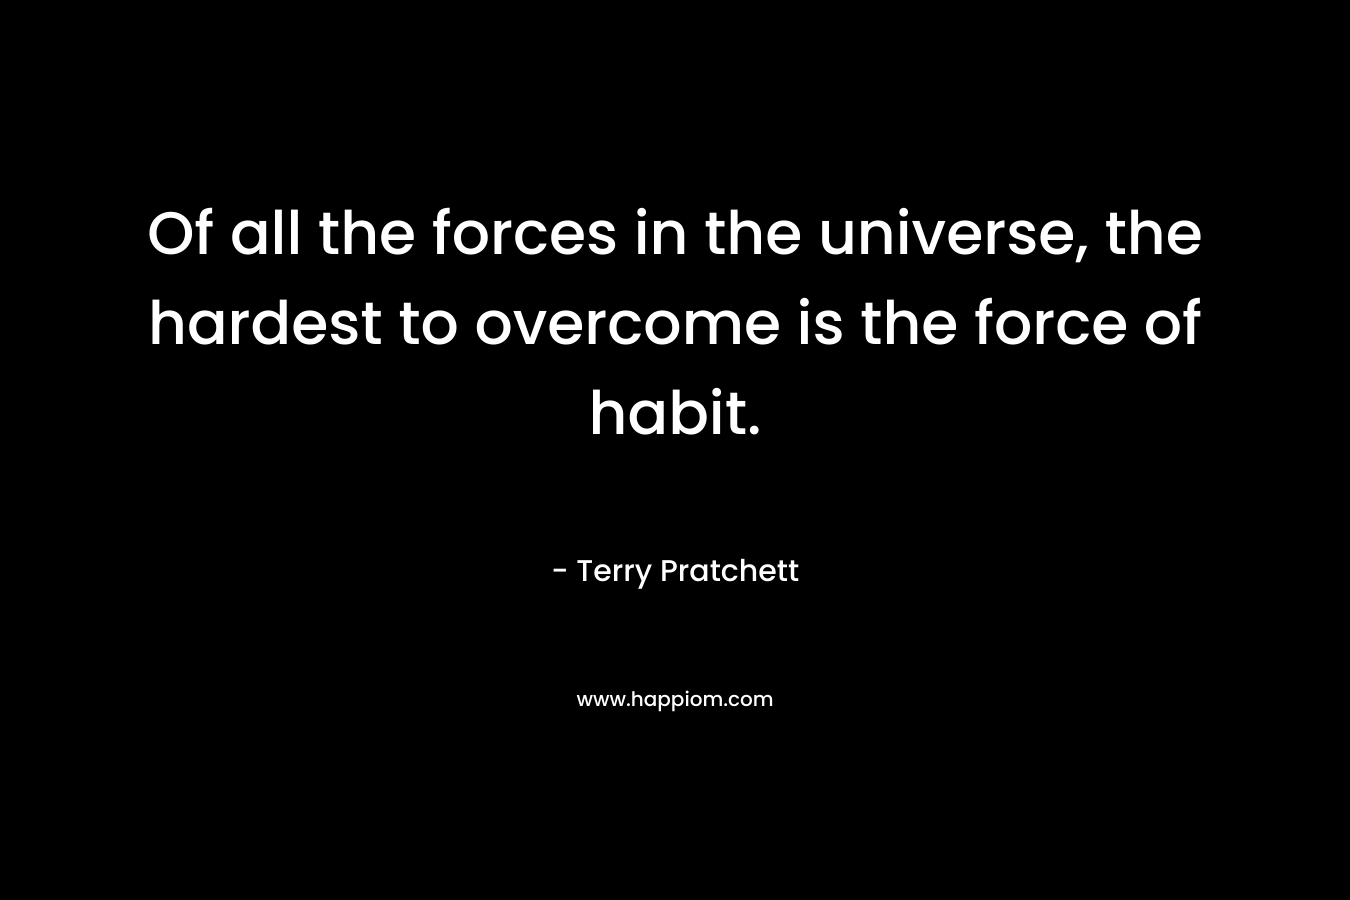 Of all the forces in the universe, the hardest to overcome is the force of habit.